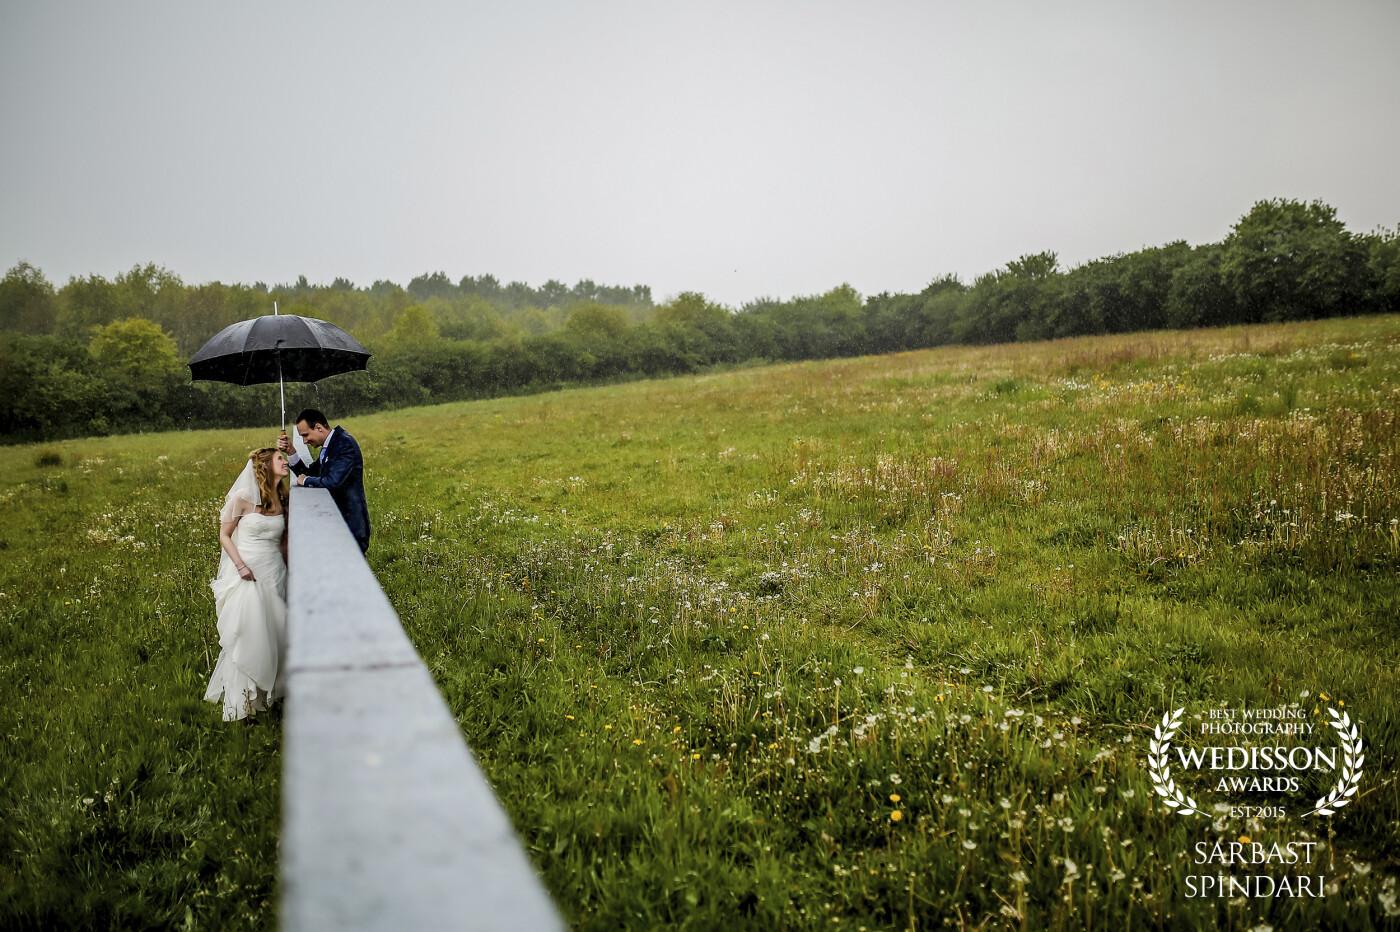 When we are together, it always feels like the sun is shining upon us. Not even a wall or rain on our wedding day can stop us from being happy and loving each other.<br />
<br />
Samantha & Danny